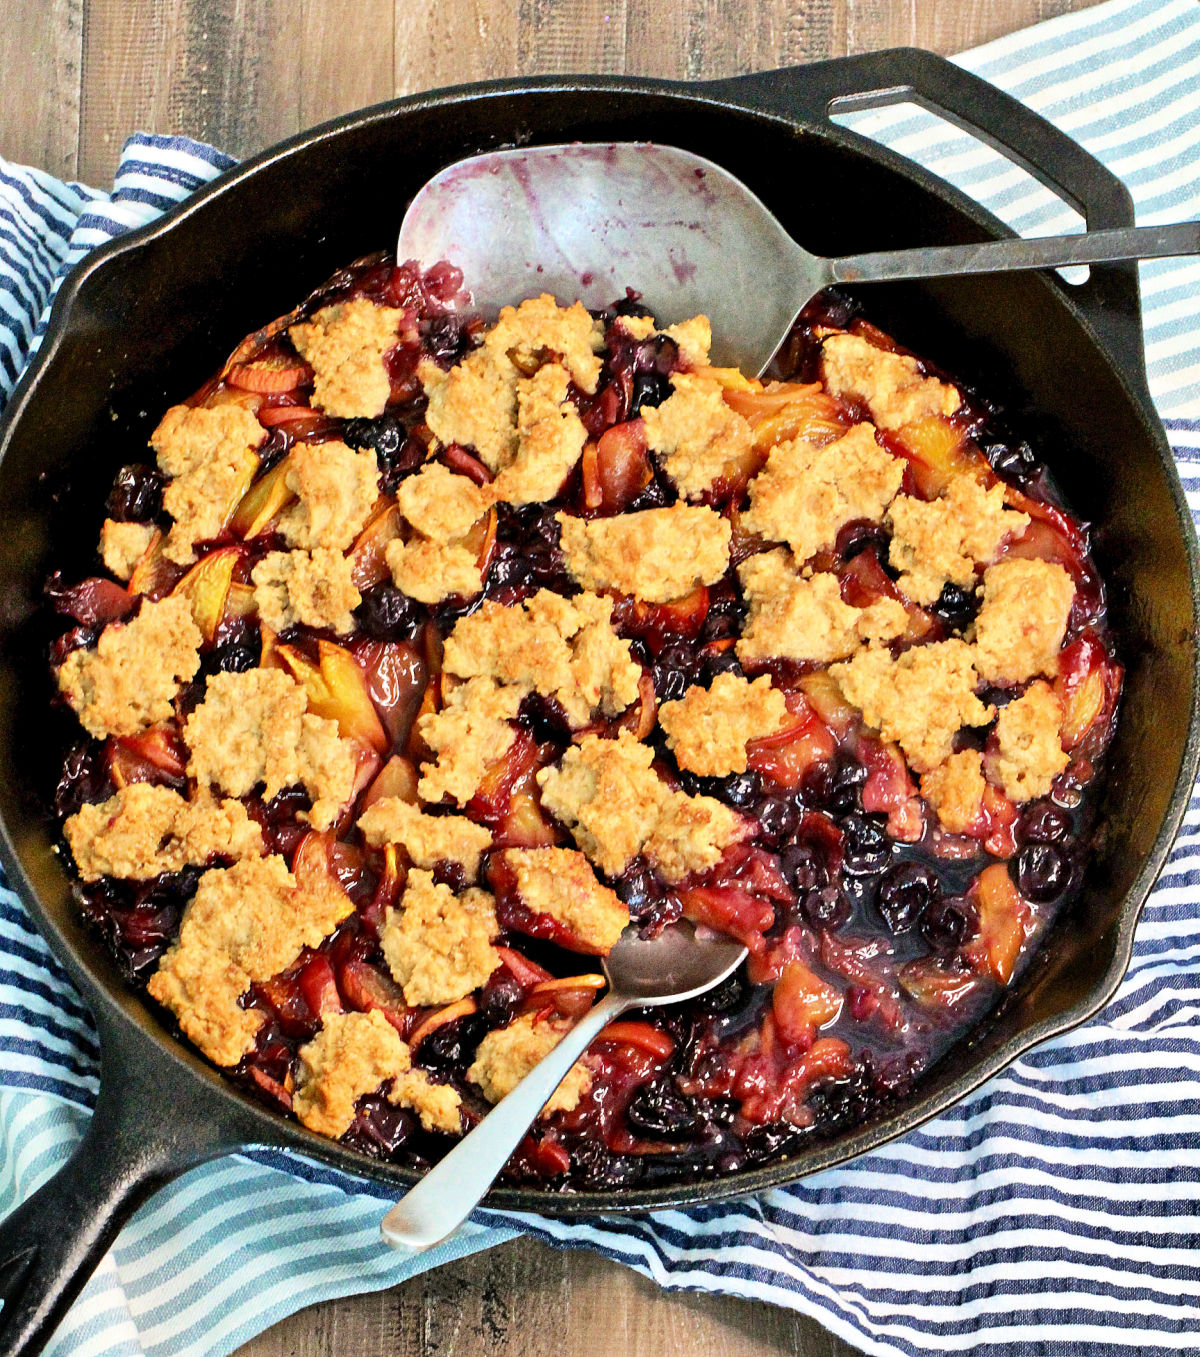 Healthy blueberry peach cobbler in a cast iron skillet with two spoons.